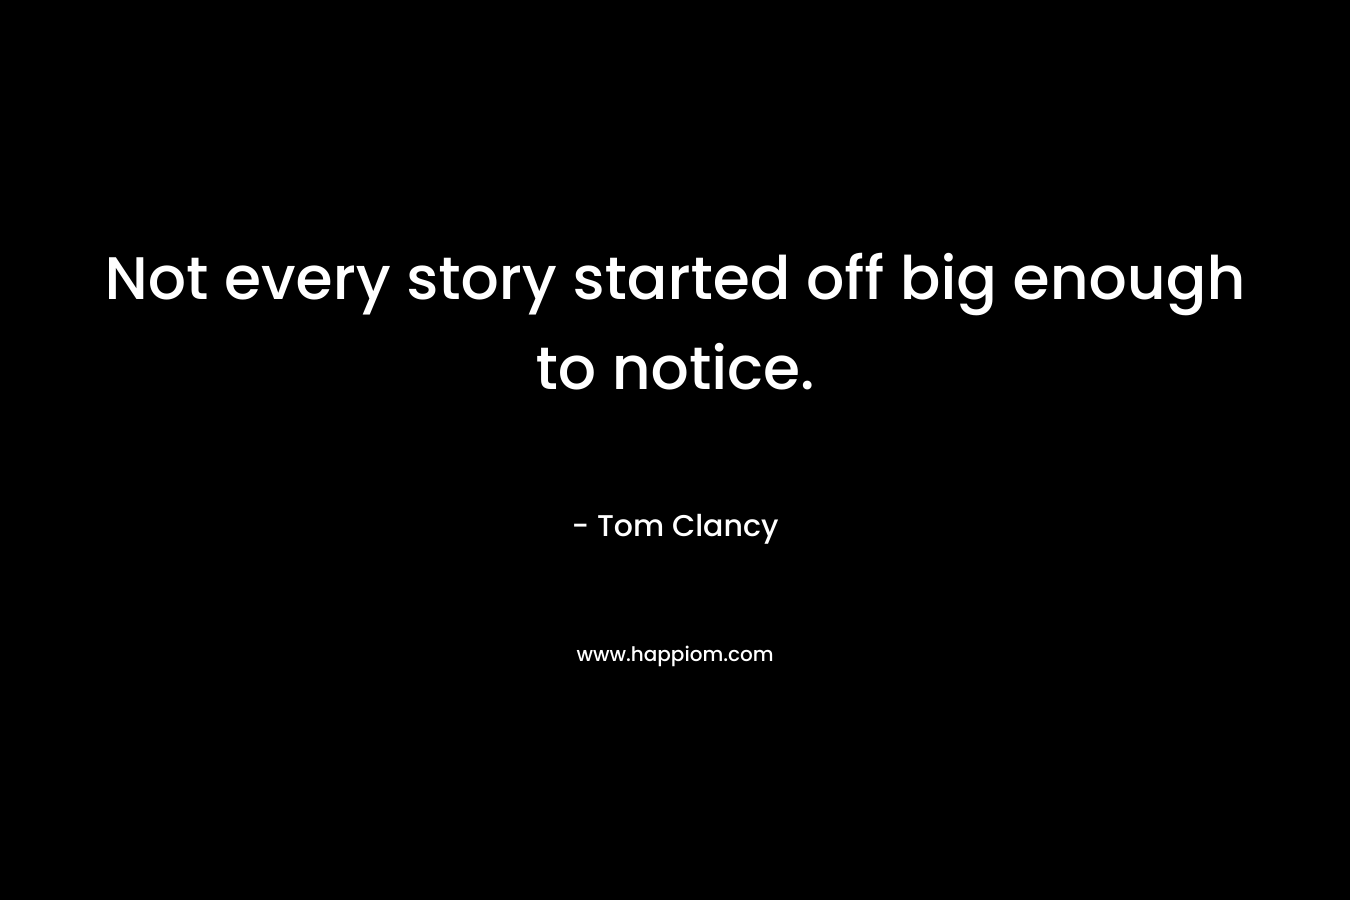 Not every story started off big enough to notice. – Tom Clancy